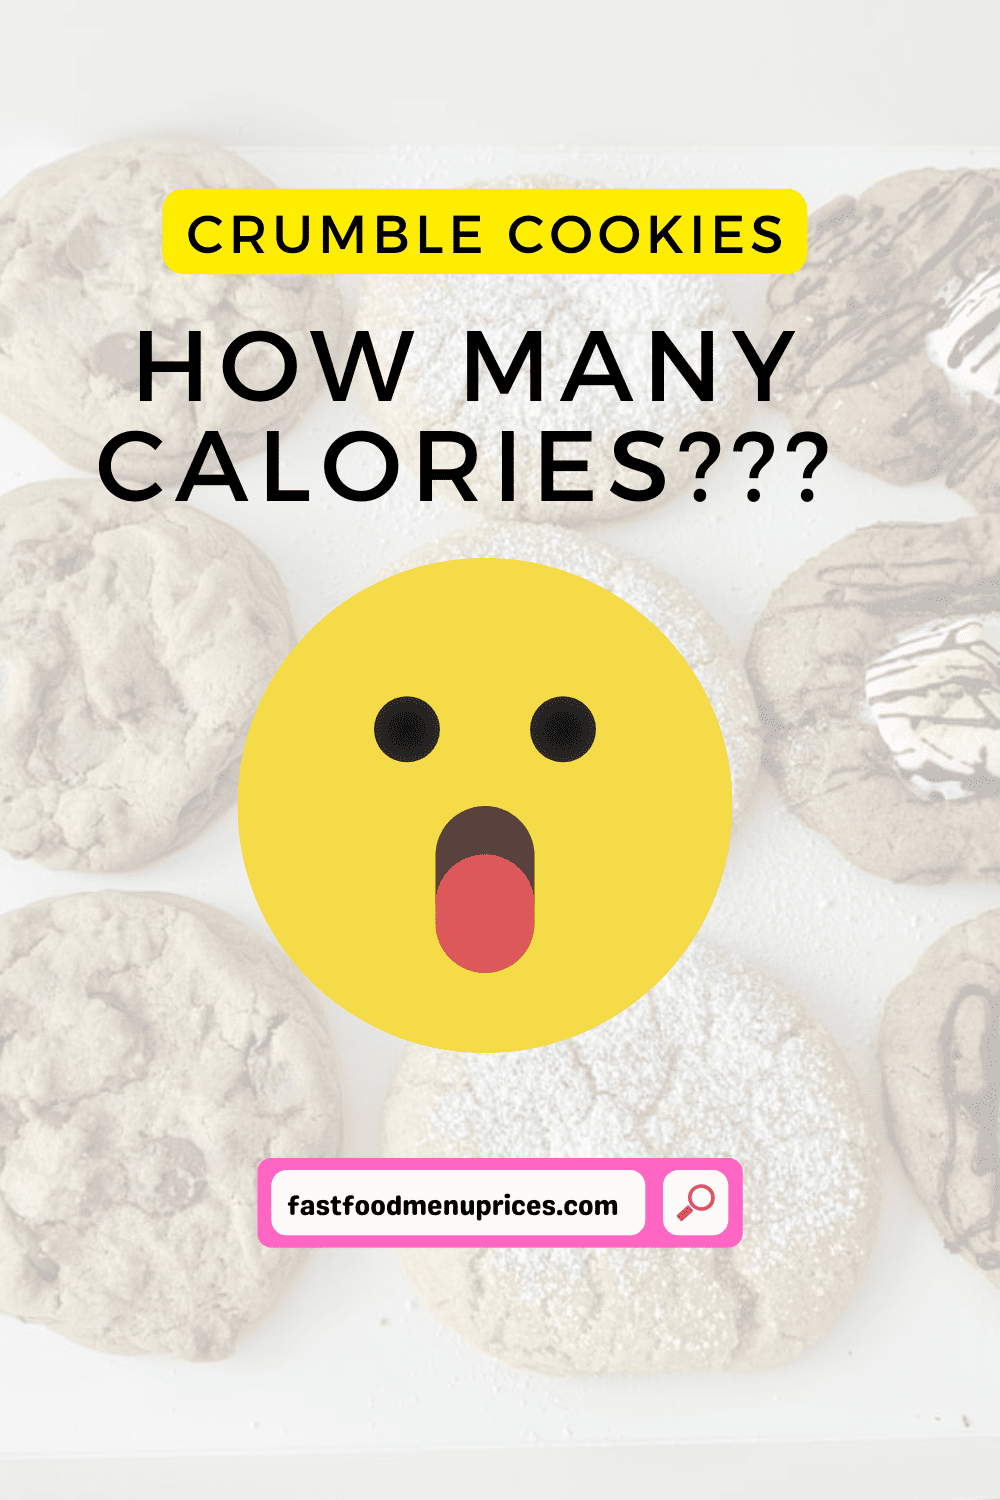 Looking for information on the calorie count of crumble cookies?